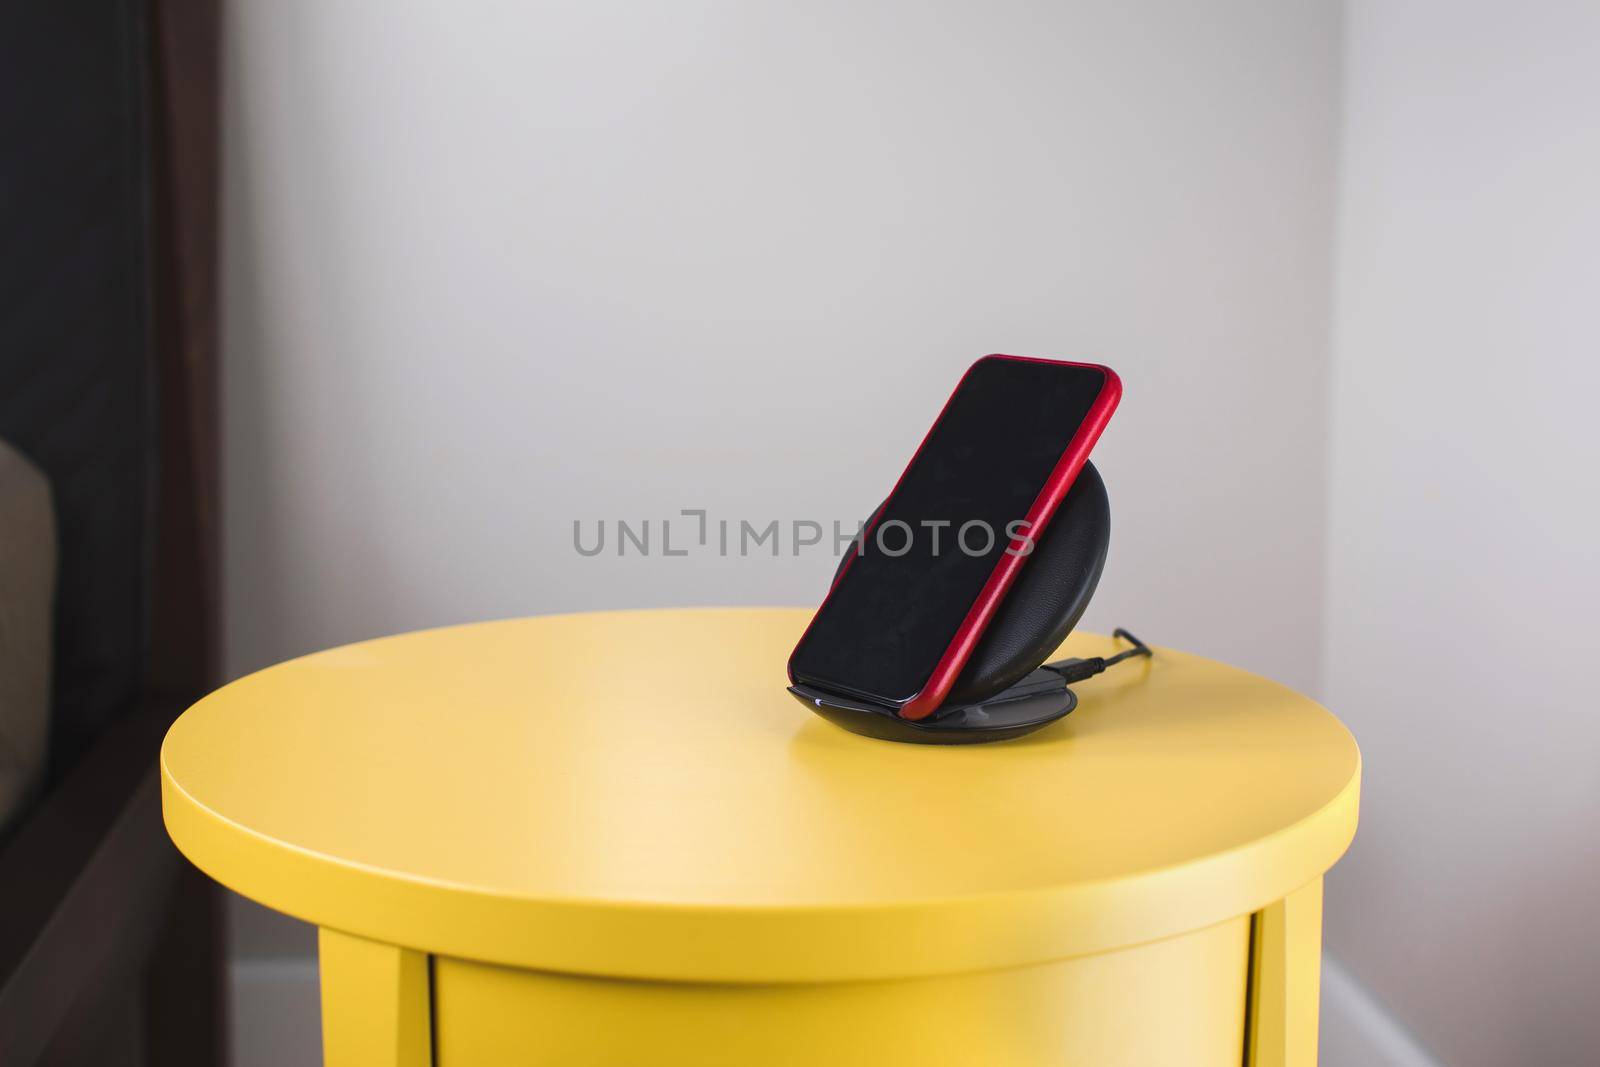 Smartphone on a wireless fast charger station by Demkat